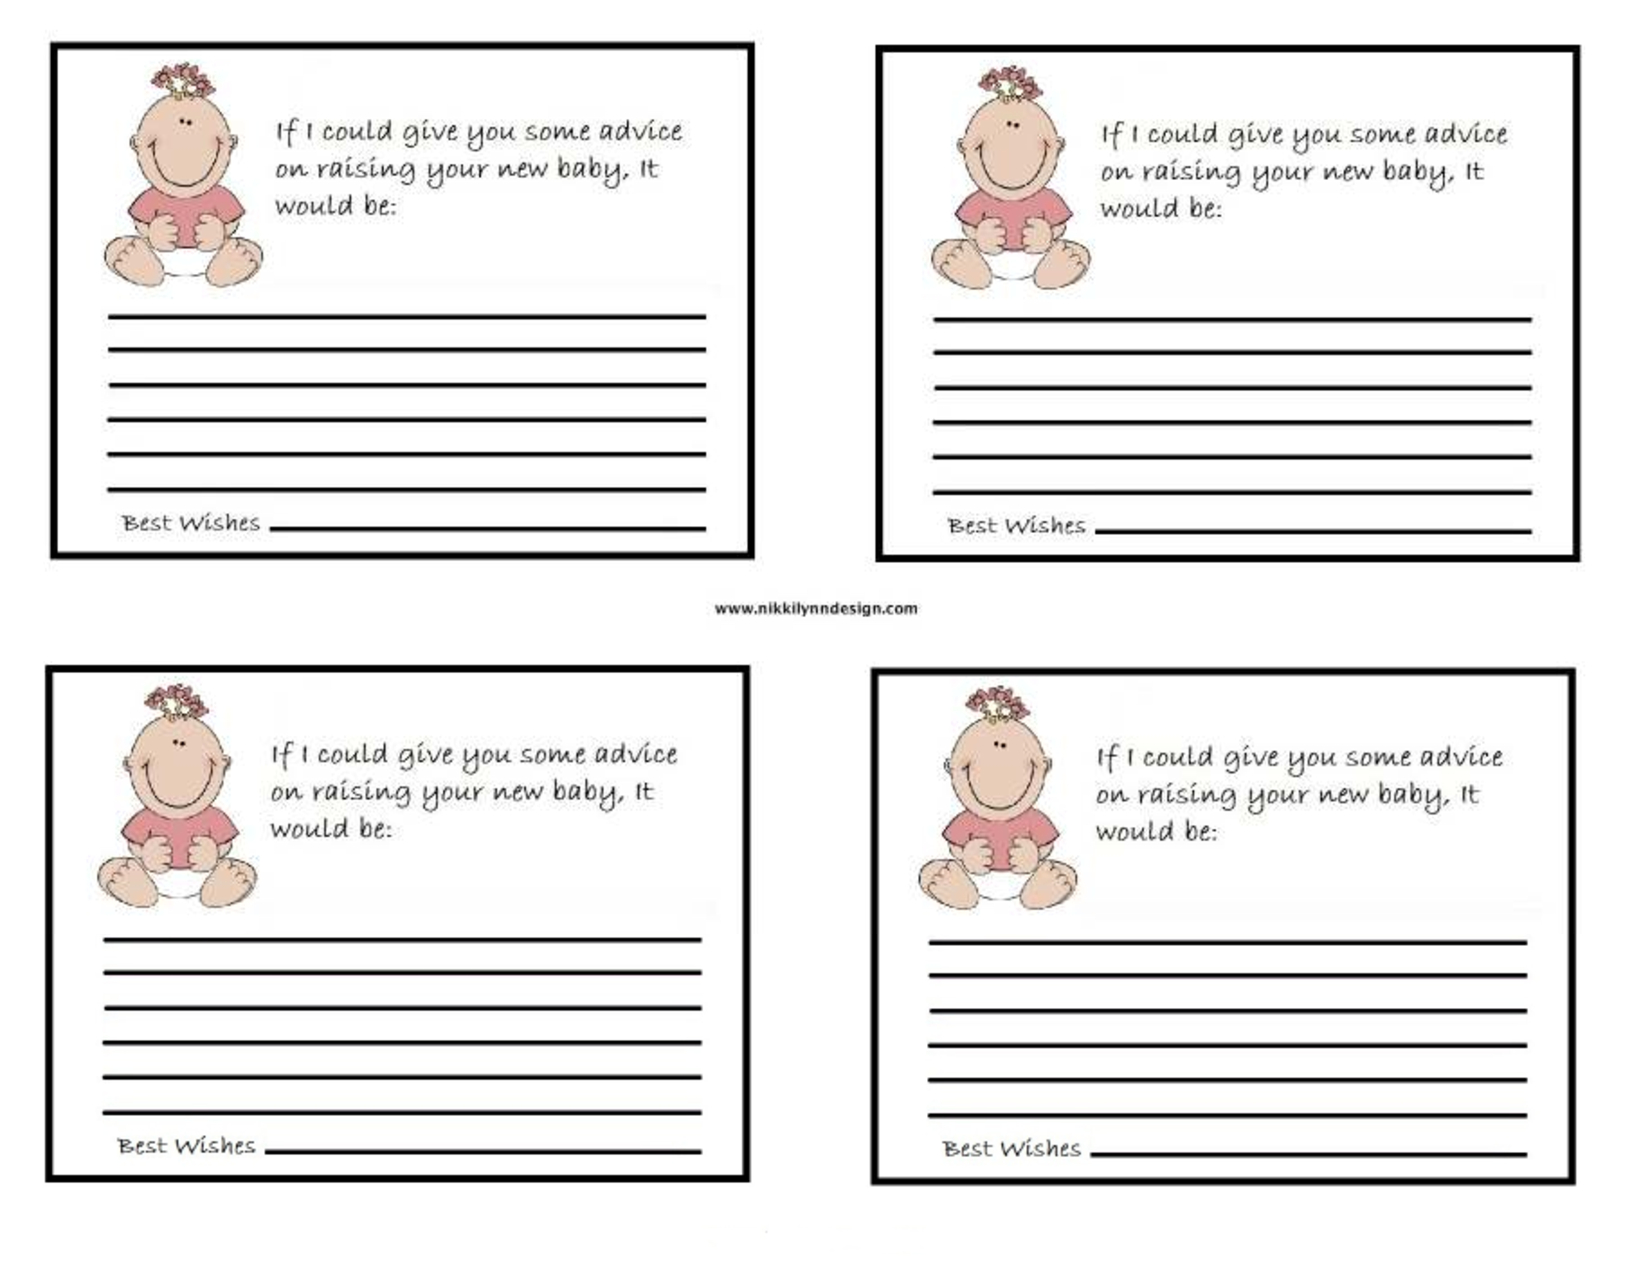 Baby Shower Games Free Printable Worksheets. Free Printable Baby - Free Printable Advice Cards For Baby Shower Template